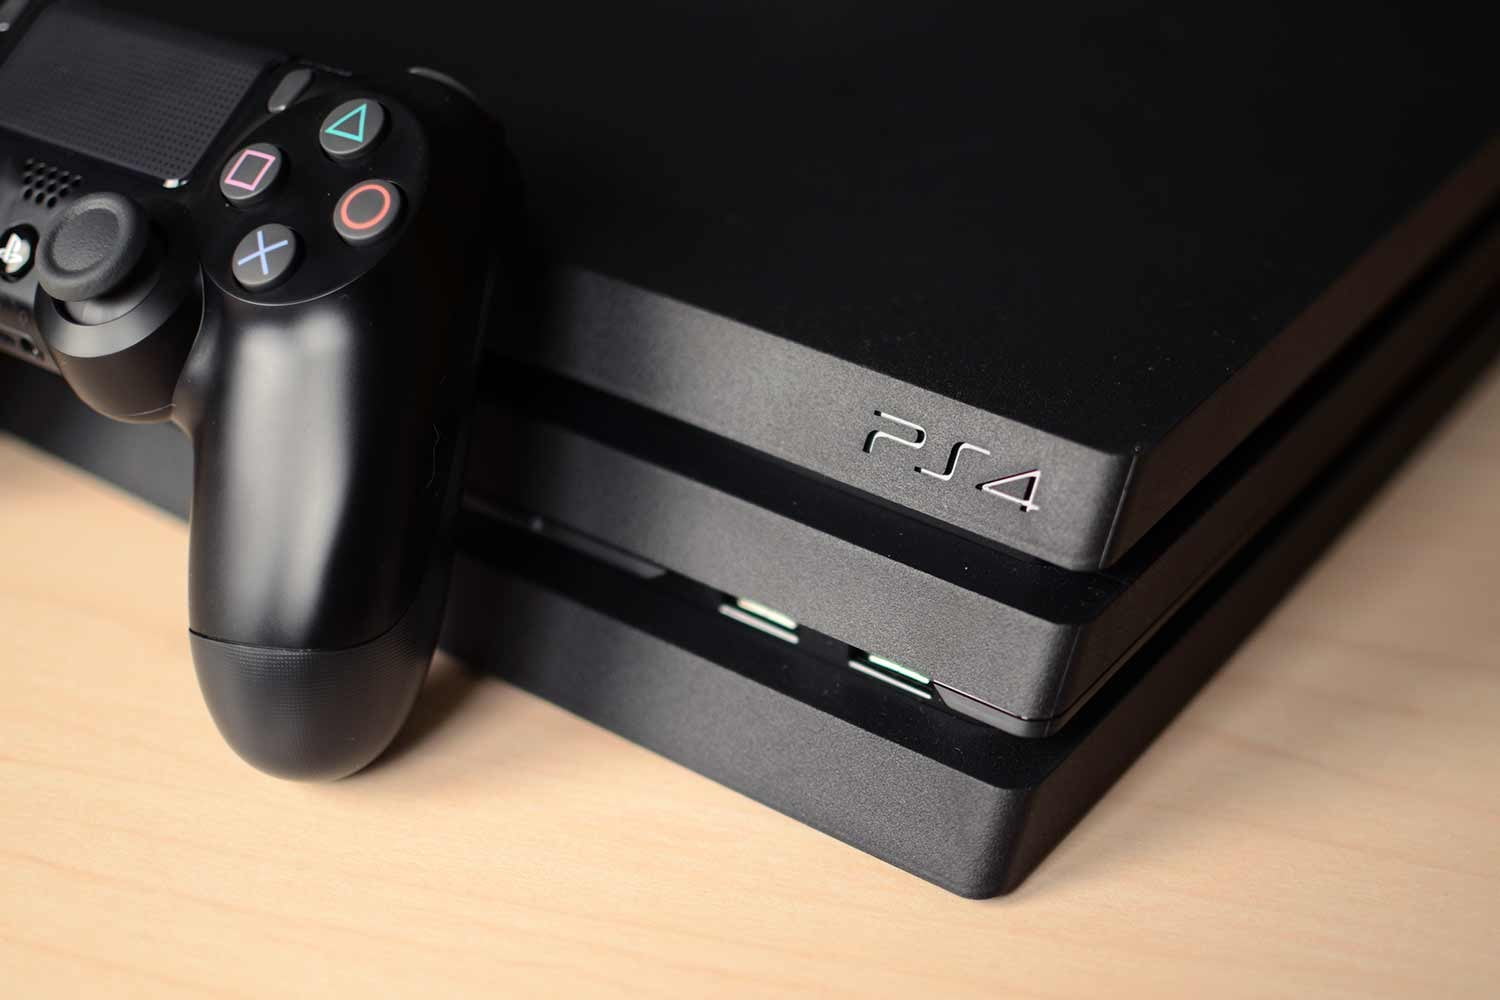 Is it worth buying a Playstation or an Xbox this holiday season?